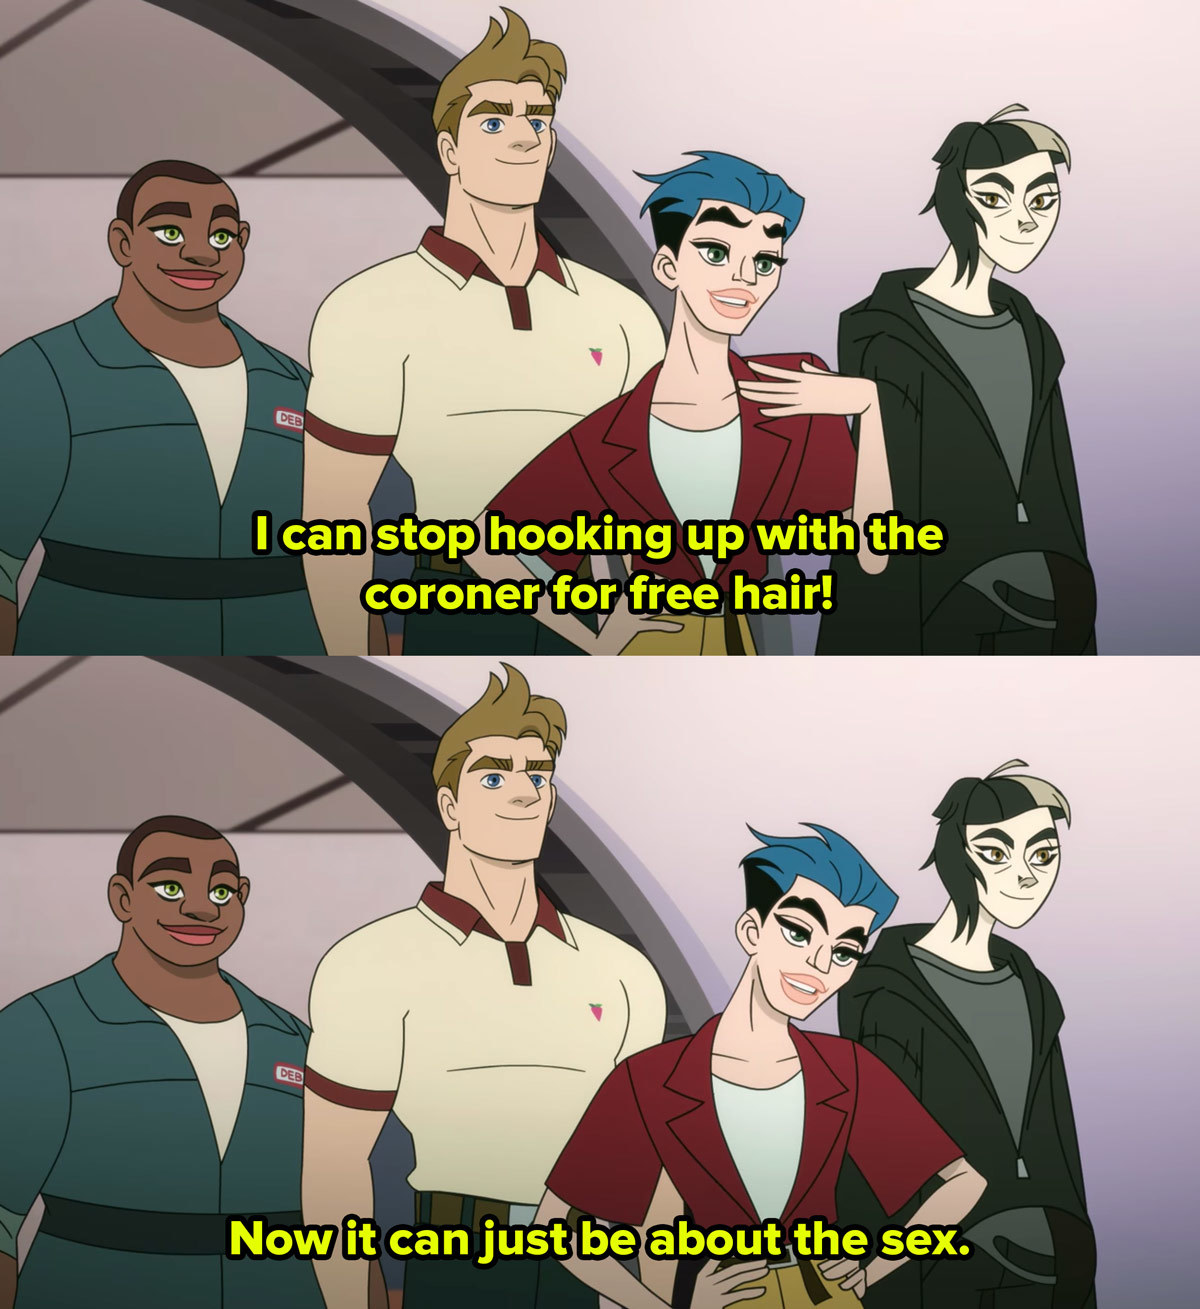 Four characters from cartoon Q Force stand in a group a young man at the front says I can stop hooking up with the coroner for free hair, now it can just be about the sex